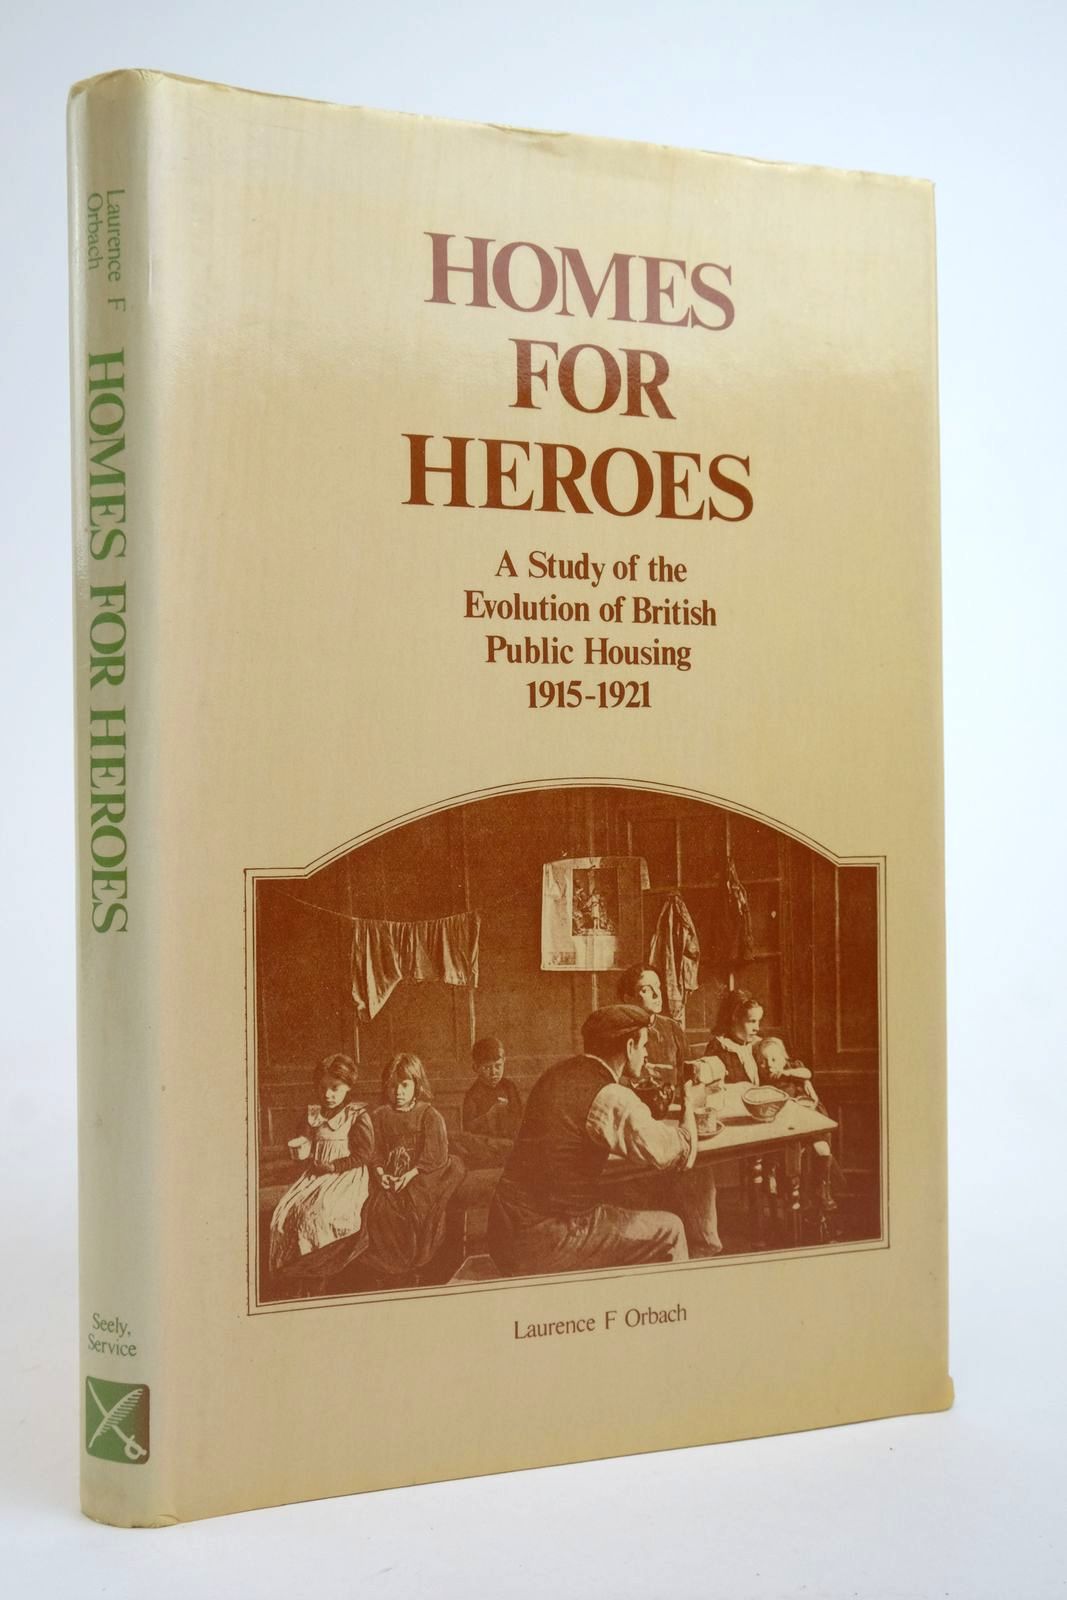 Photo of HOMES FOR HEROES: A STUDY OF THE EVOLUTION OF BRITISH PUBLIC HOUSING, 1915 - 1921 written by Orbach, Laurence F. published by Seeley, Service & Co. Ltd. (STOCK CODE: 2135711)  for sale by Stella & Rose's Books